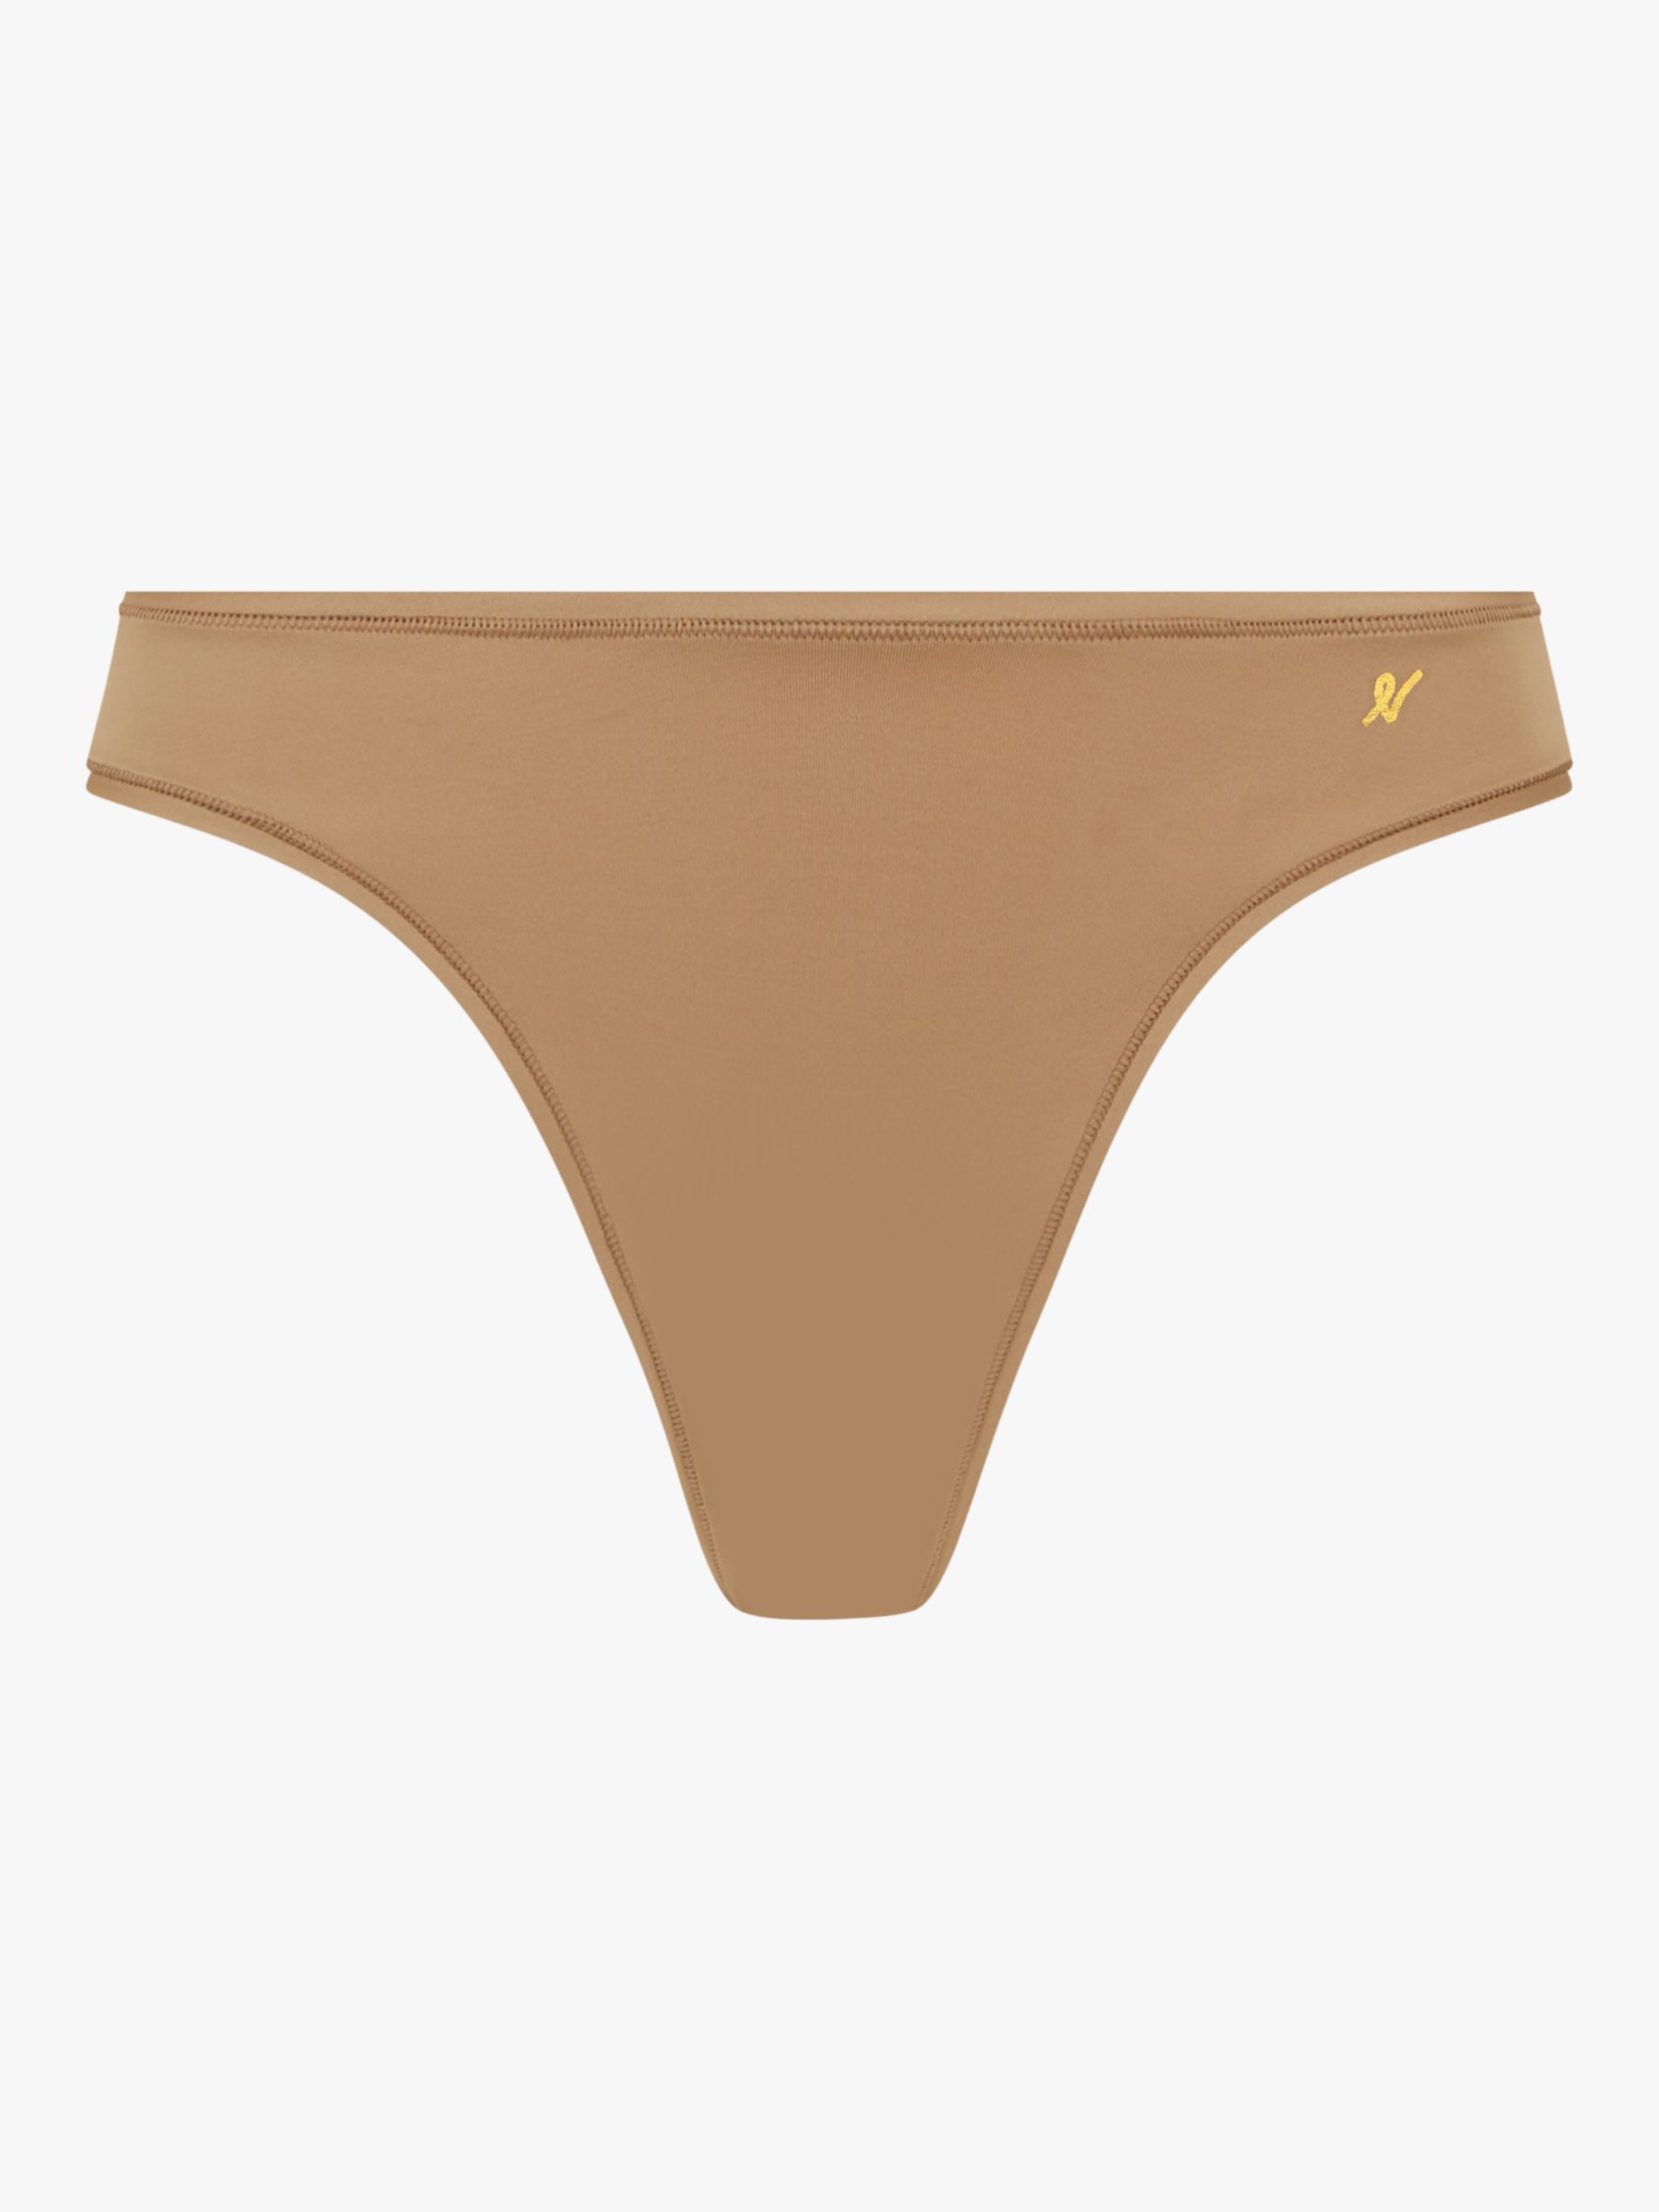 Track Fits Everybody Dipped Front Thong - Espresso - XL at Skims